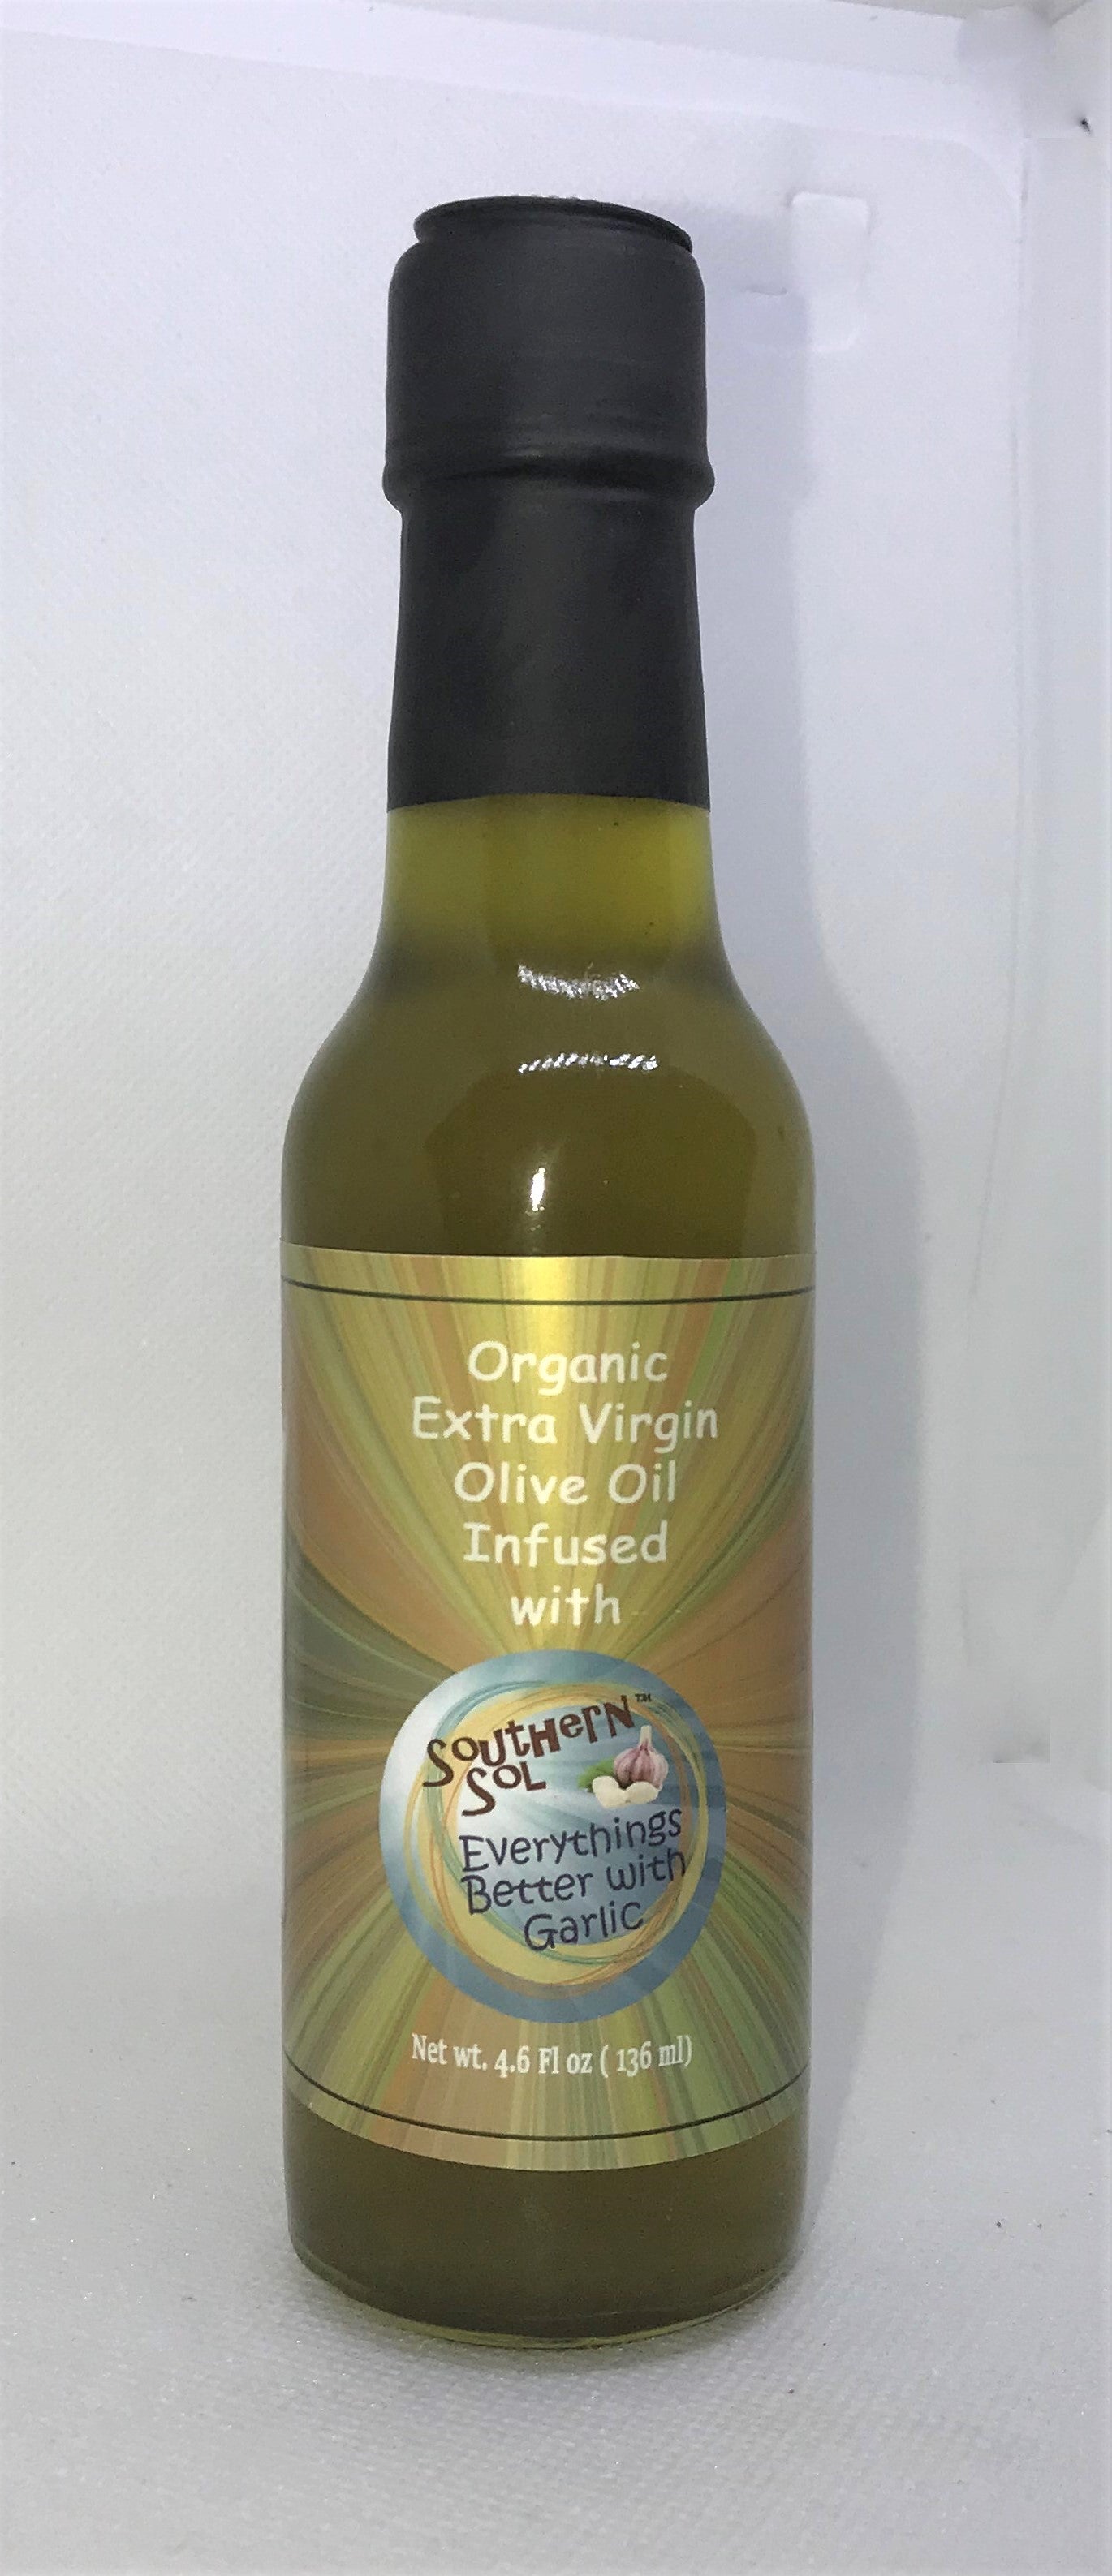 Everything is Better with Garlic Infused Oil - Southern Sol